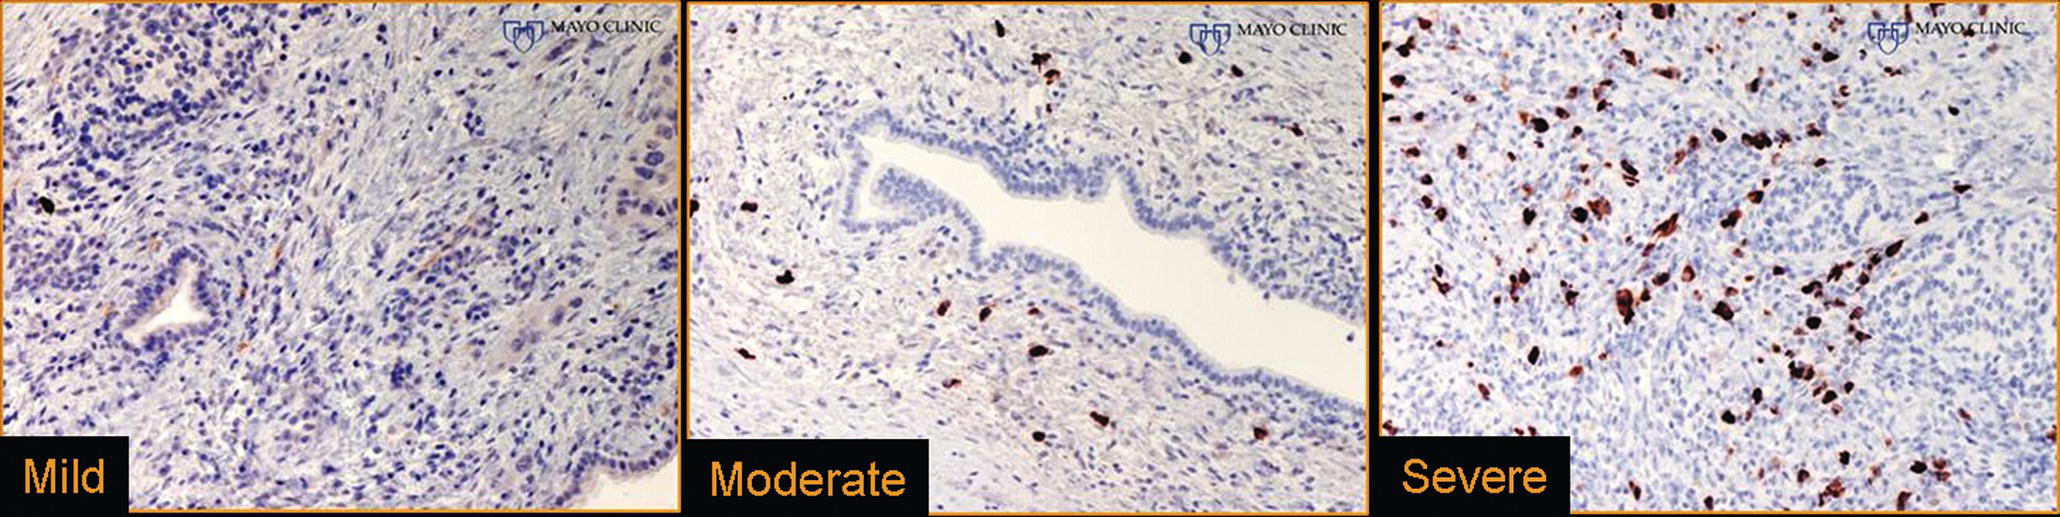 Photo depicts IgG4 immunostaining of the Tru-cut biopsy specimen reveals the findings of mild infiltration and severe infiltration.